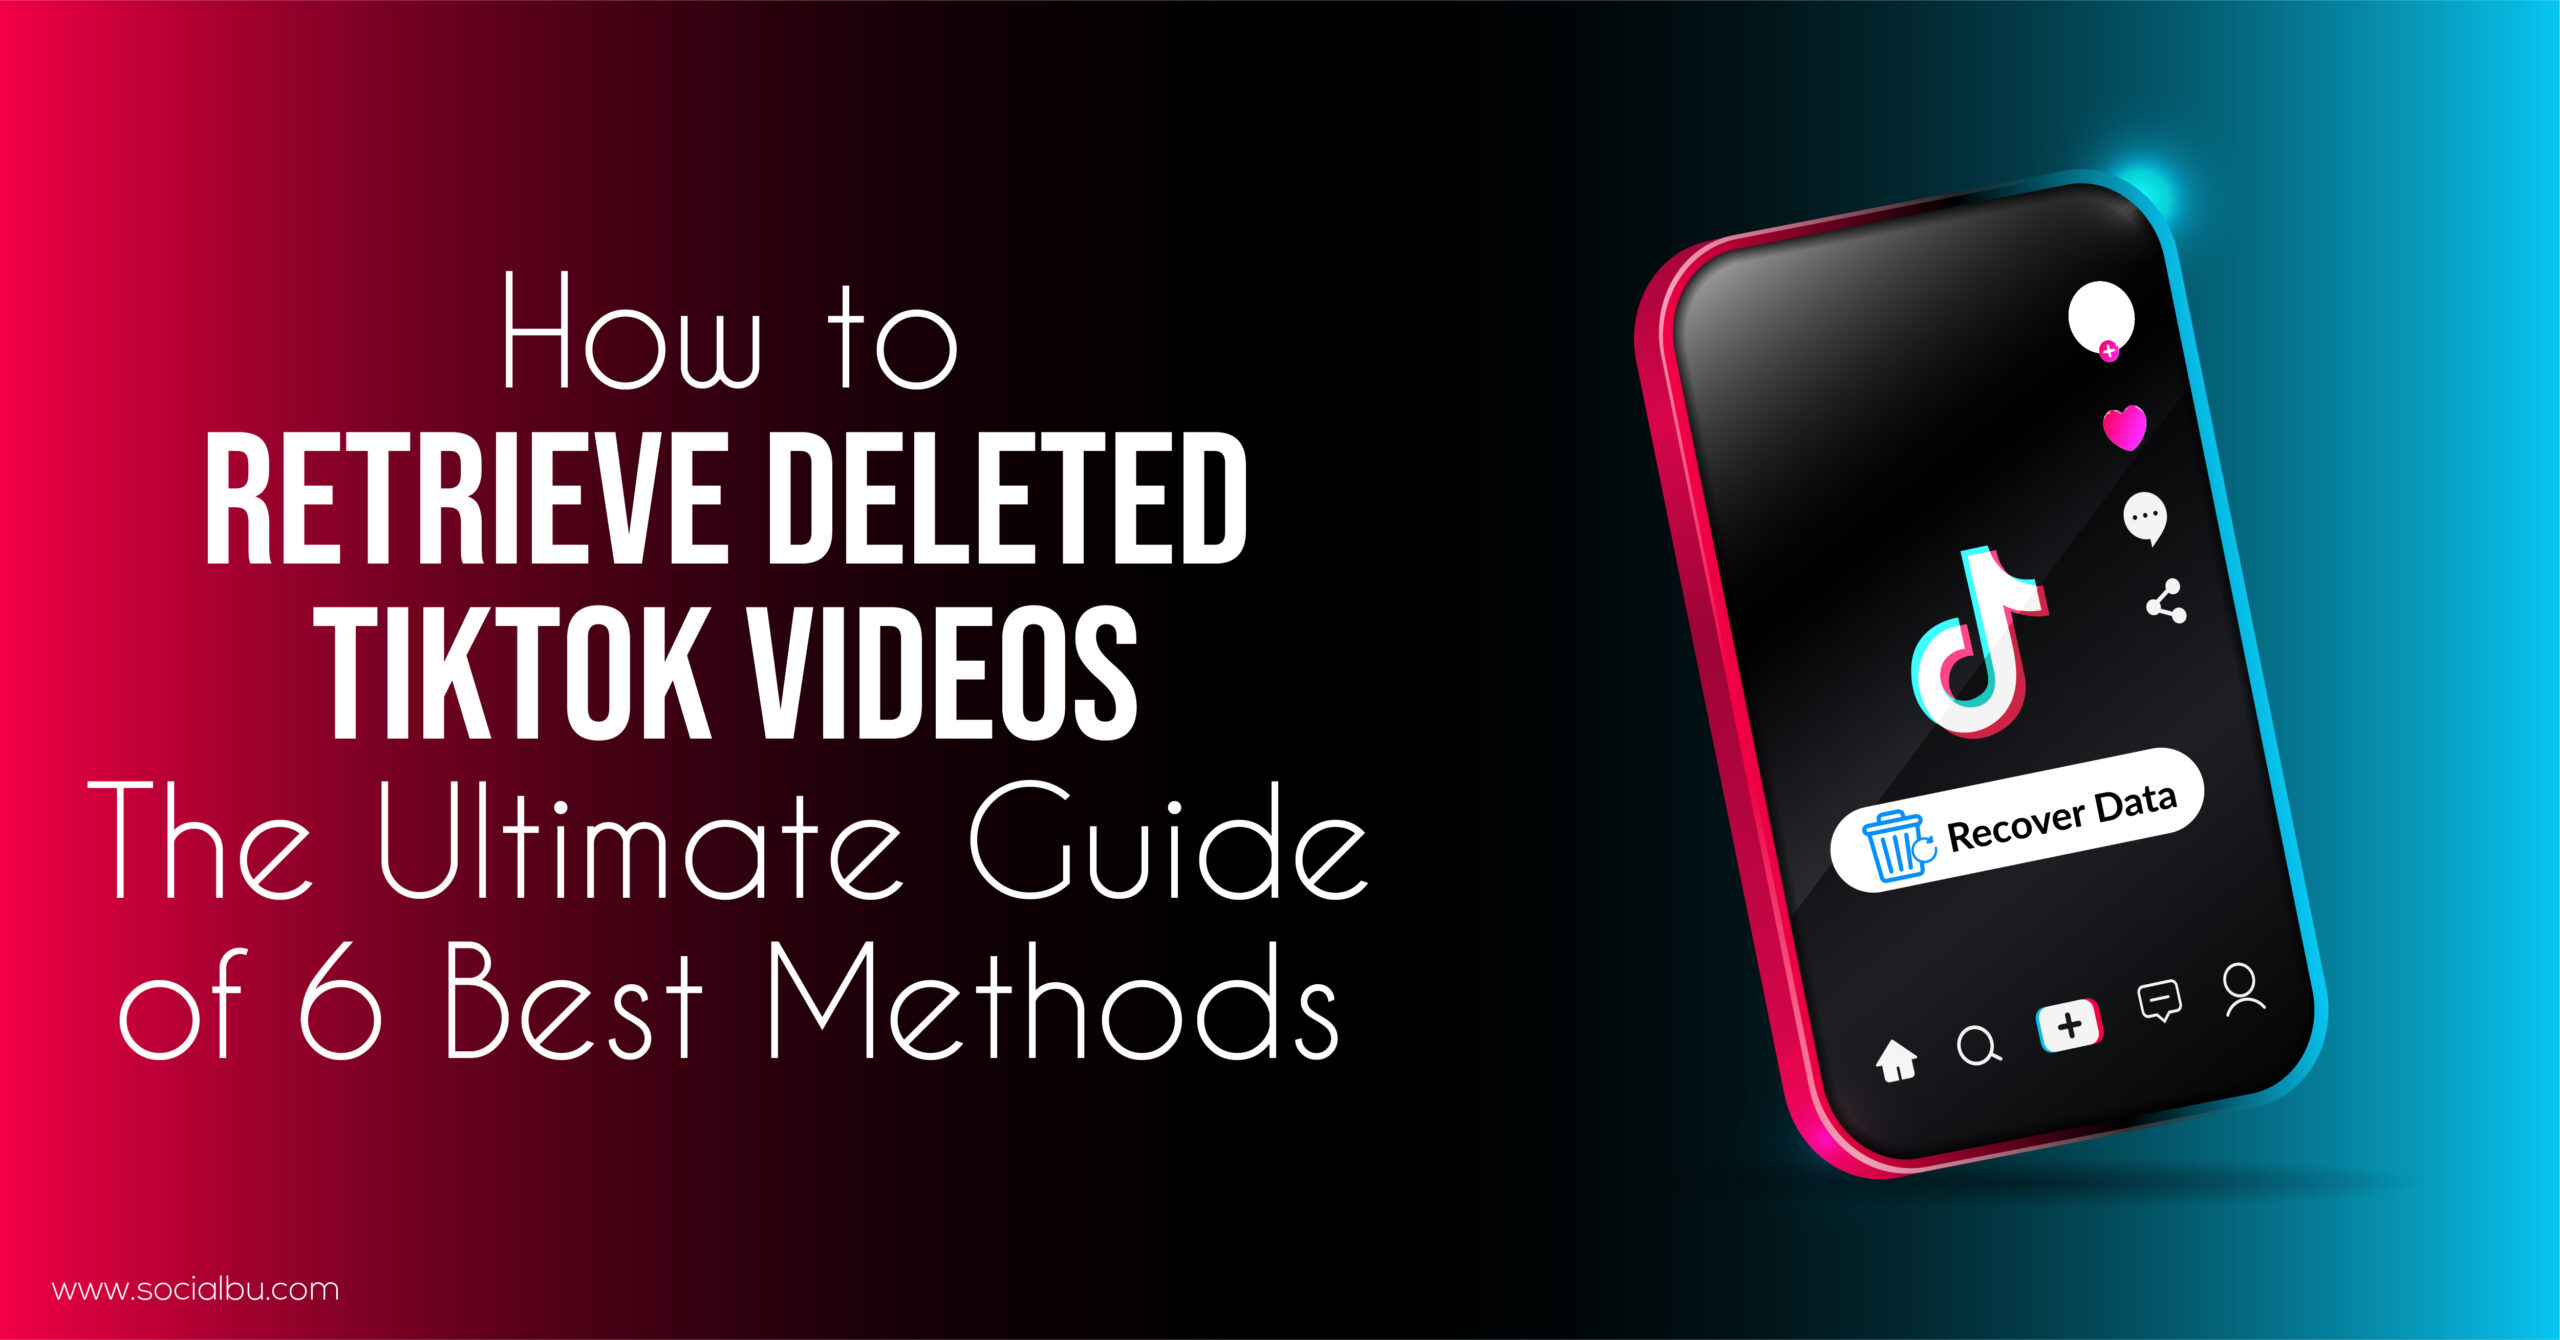 How to Retrieve Deleted TikTok Videos: The Ultimate Guide of 6 Best Methods